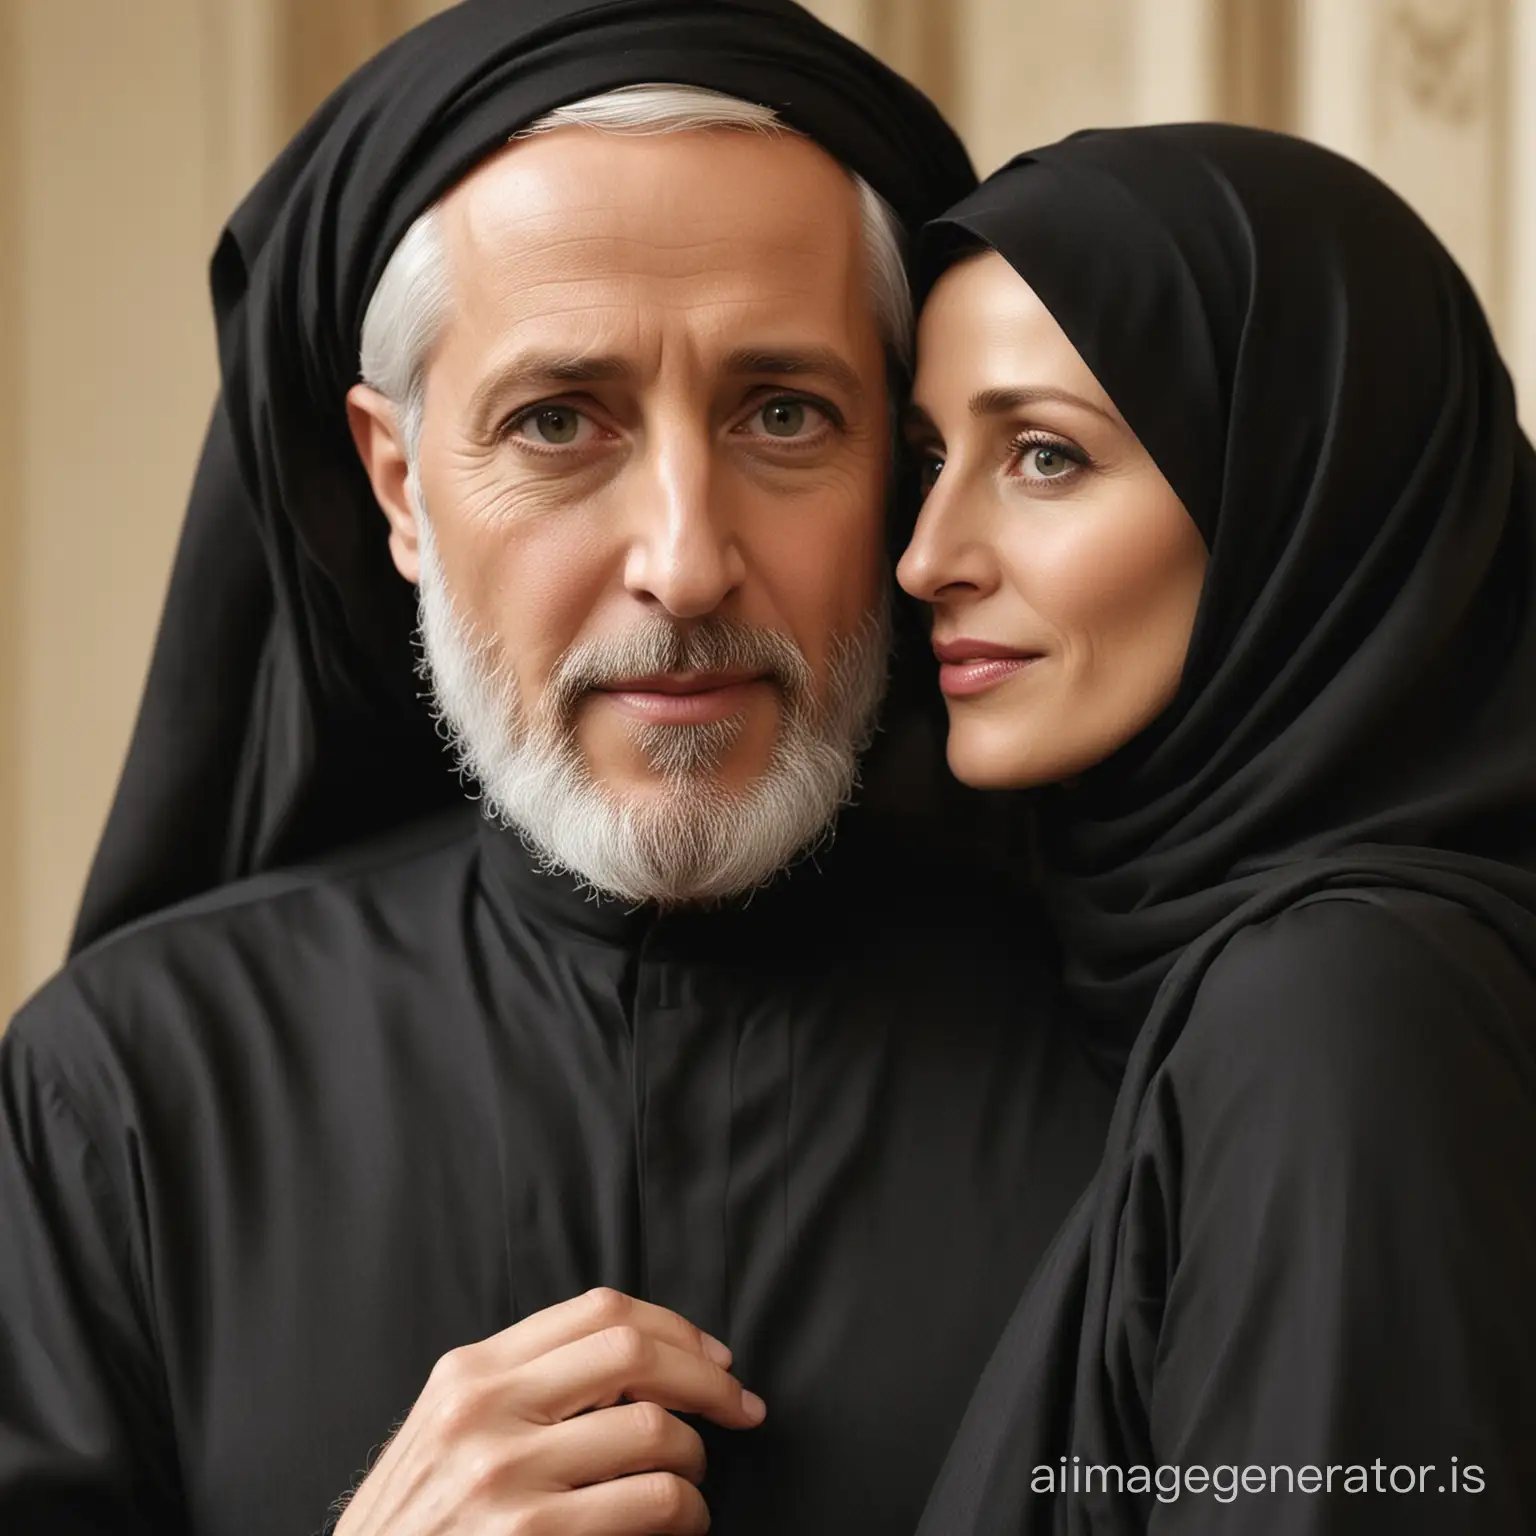 Gillian Anderson is marrying an old Arab sheik, he hypnotized her to become his Muslim devoted wife, he adorned her in a black floor-length abaya with long black hijab and niqab